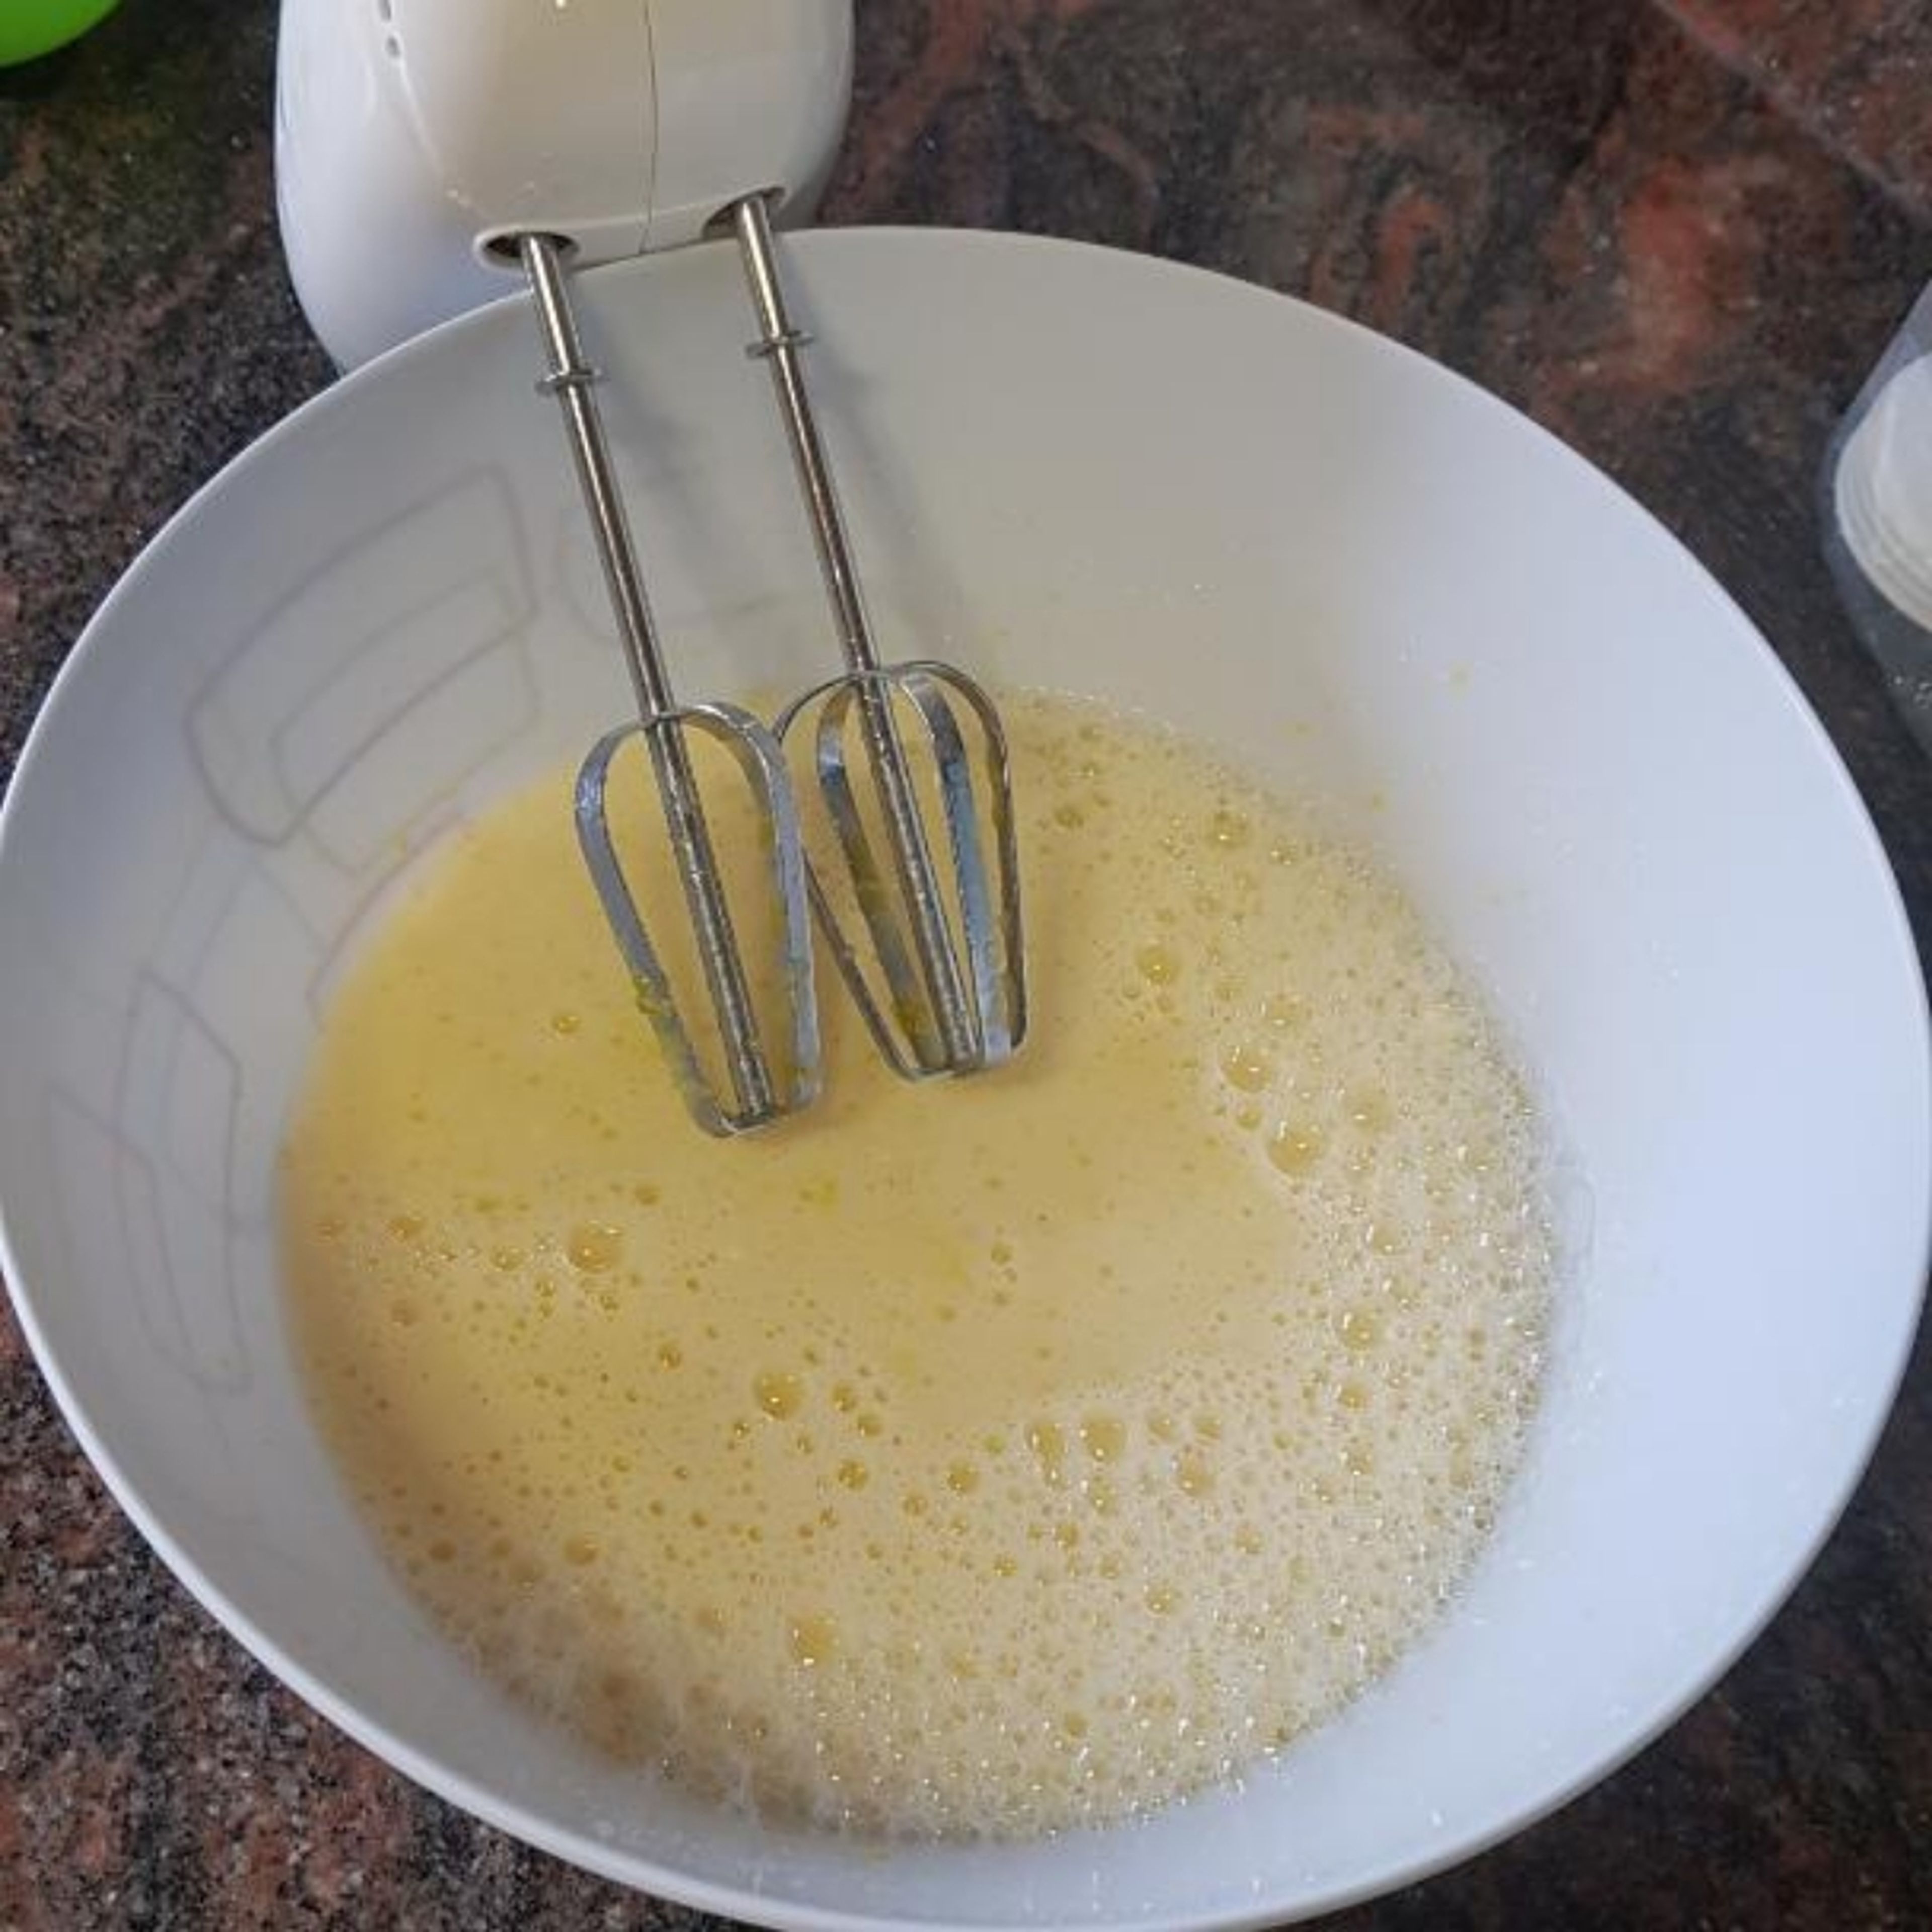 mix the milk with the water then add them to the mixture the the oil. use the electrical mixer